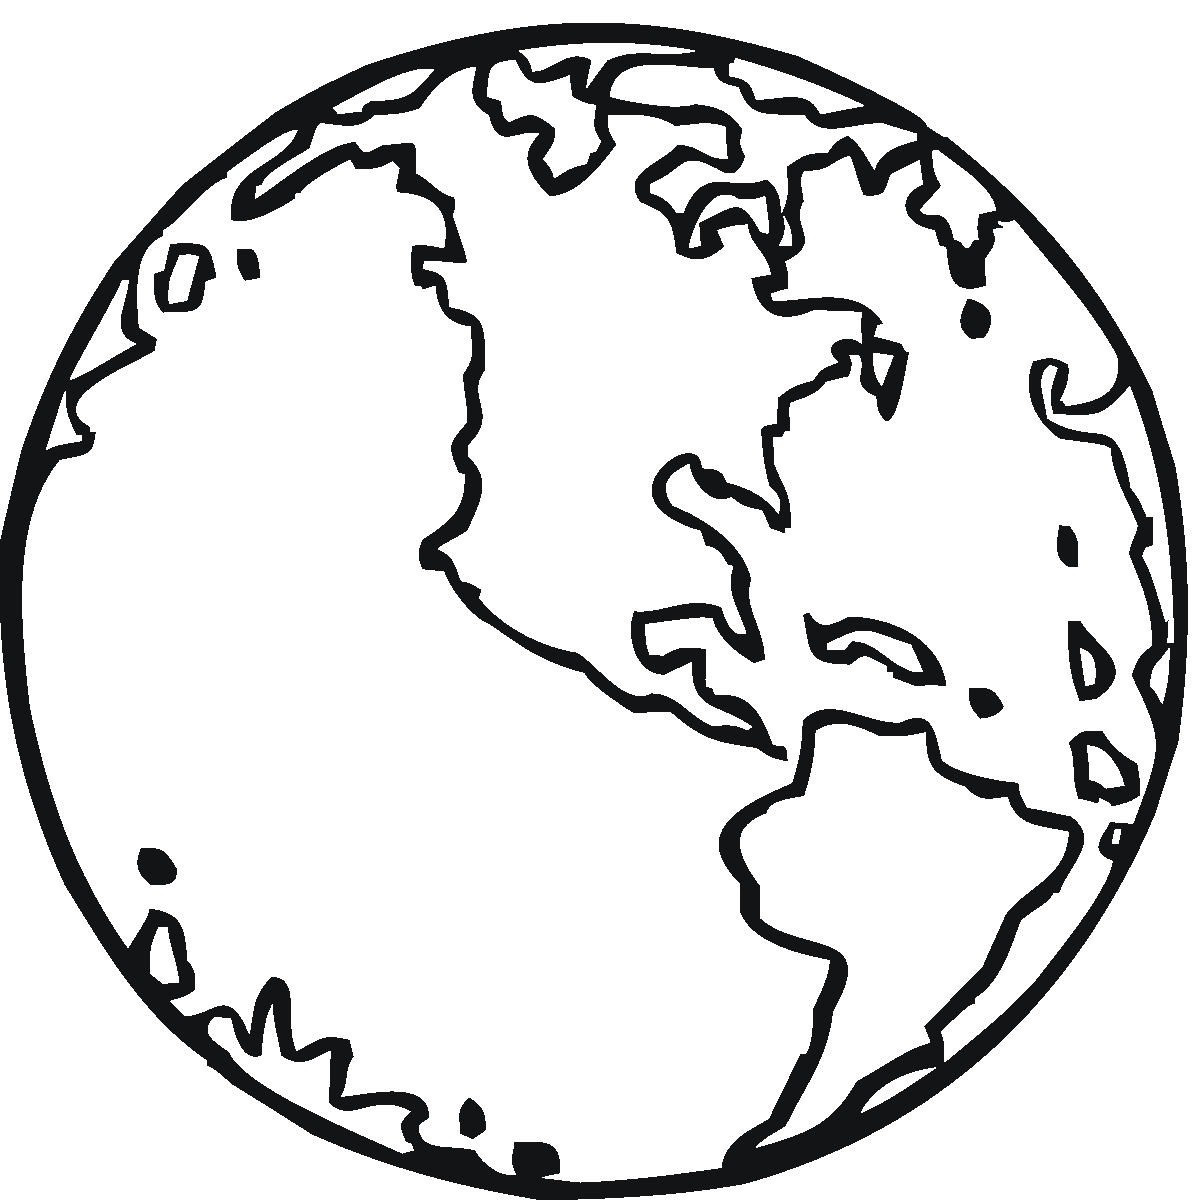 Printable Earth Coloring Pages
 Free Printable Earth Coloring Pages For Kids